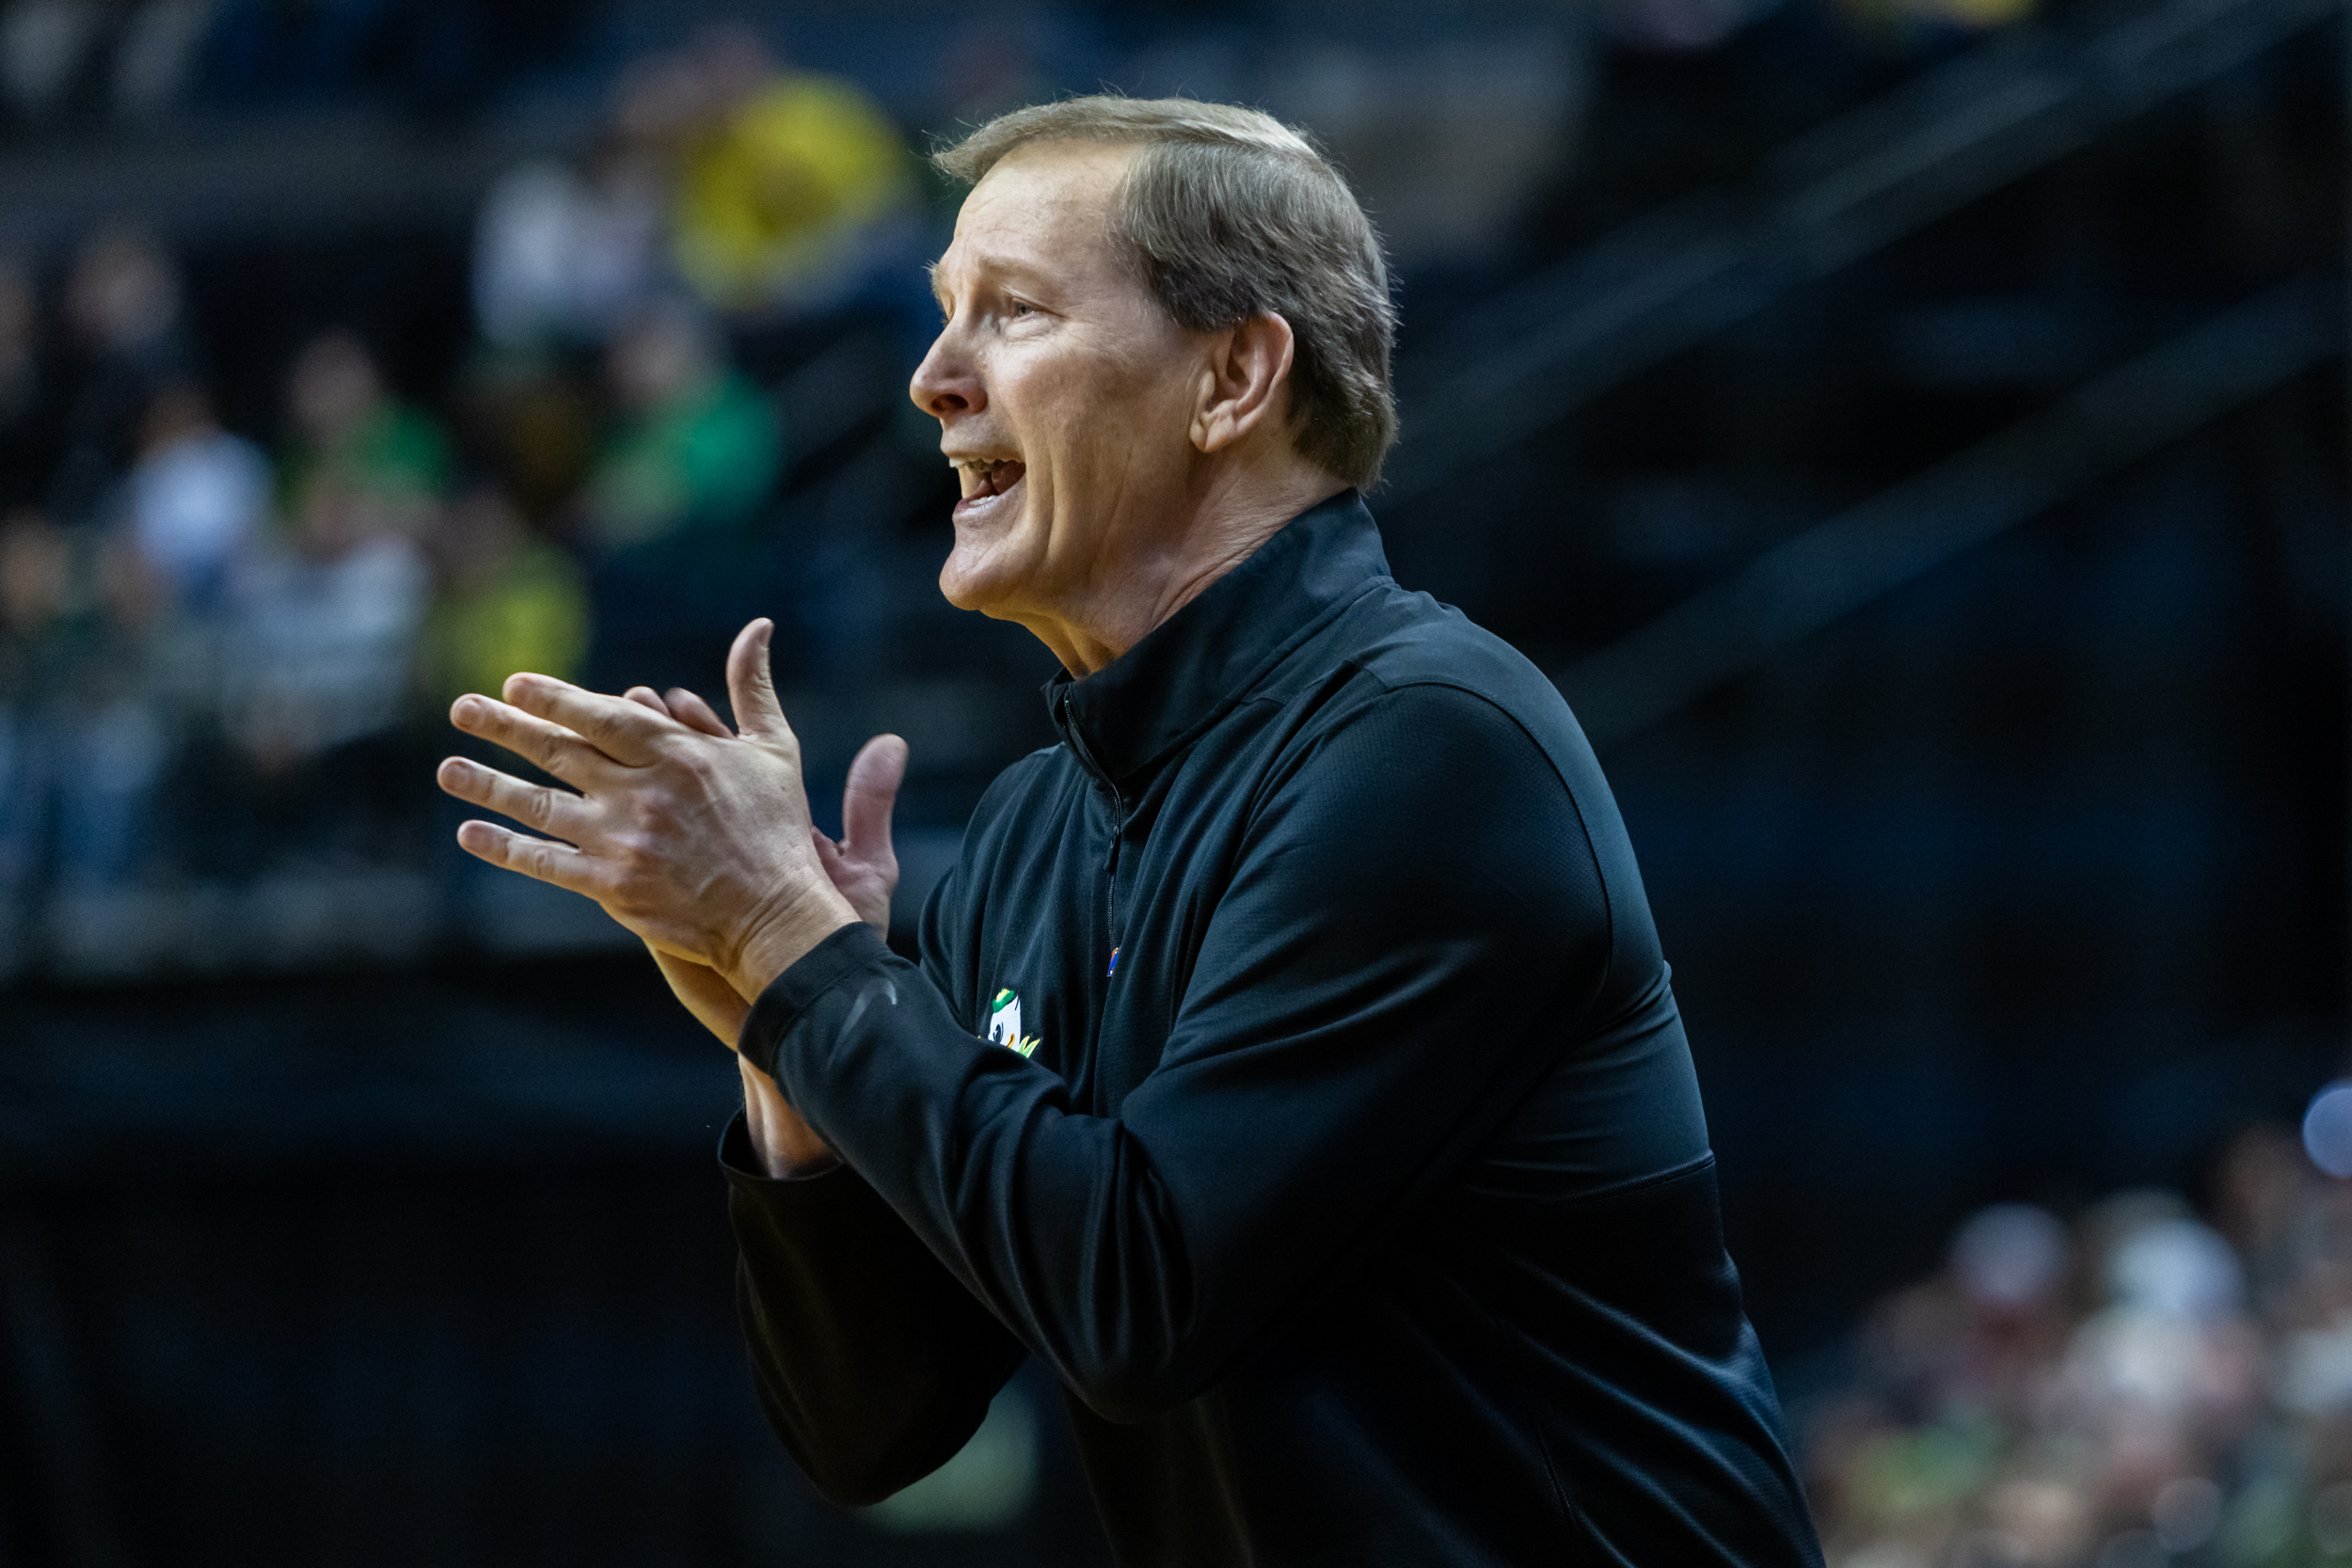 Bill Oram: Oregon Ducks are peaking at the right time. Isn't that